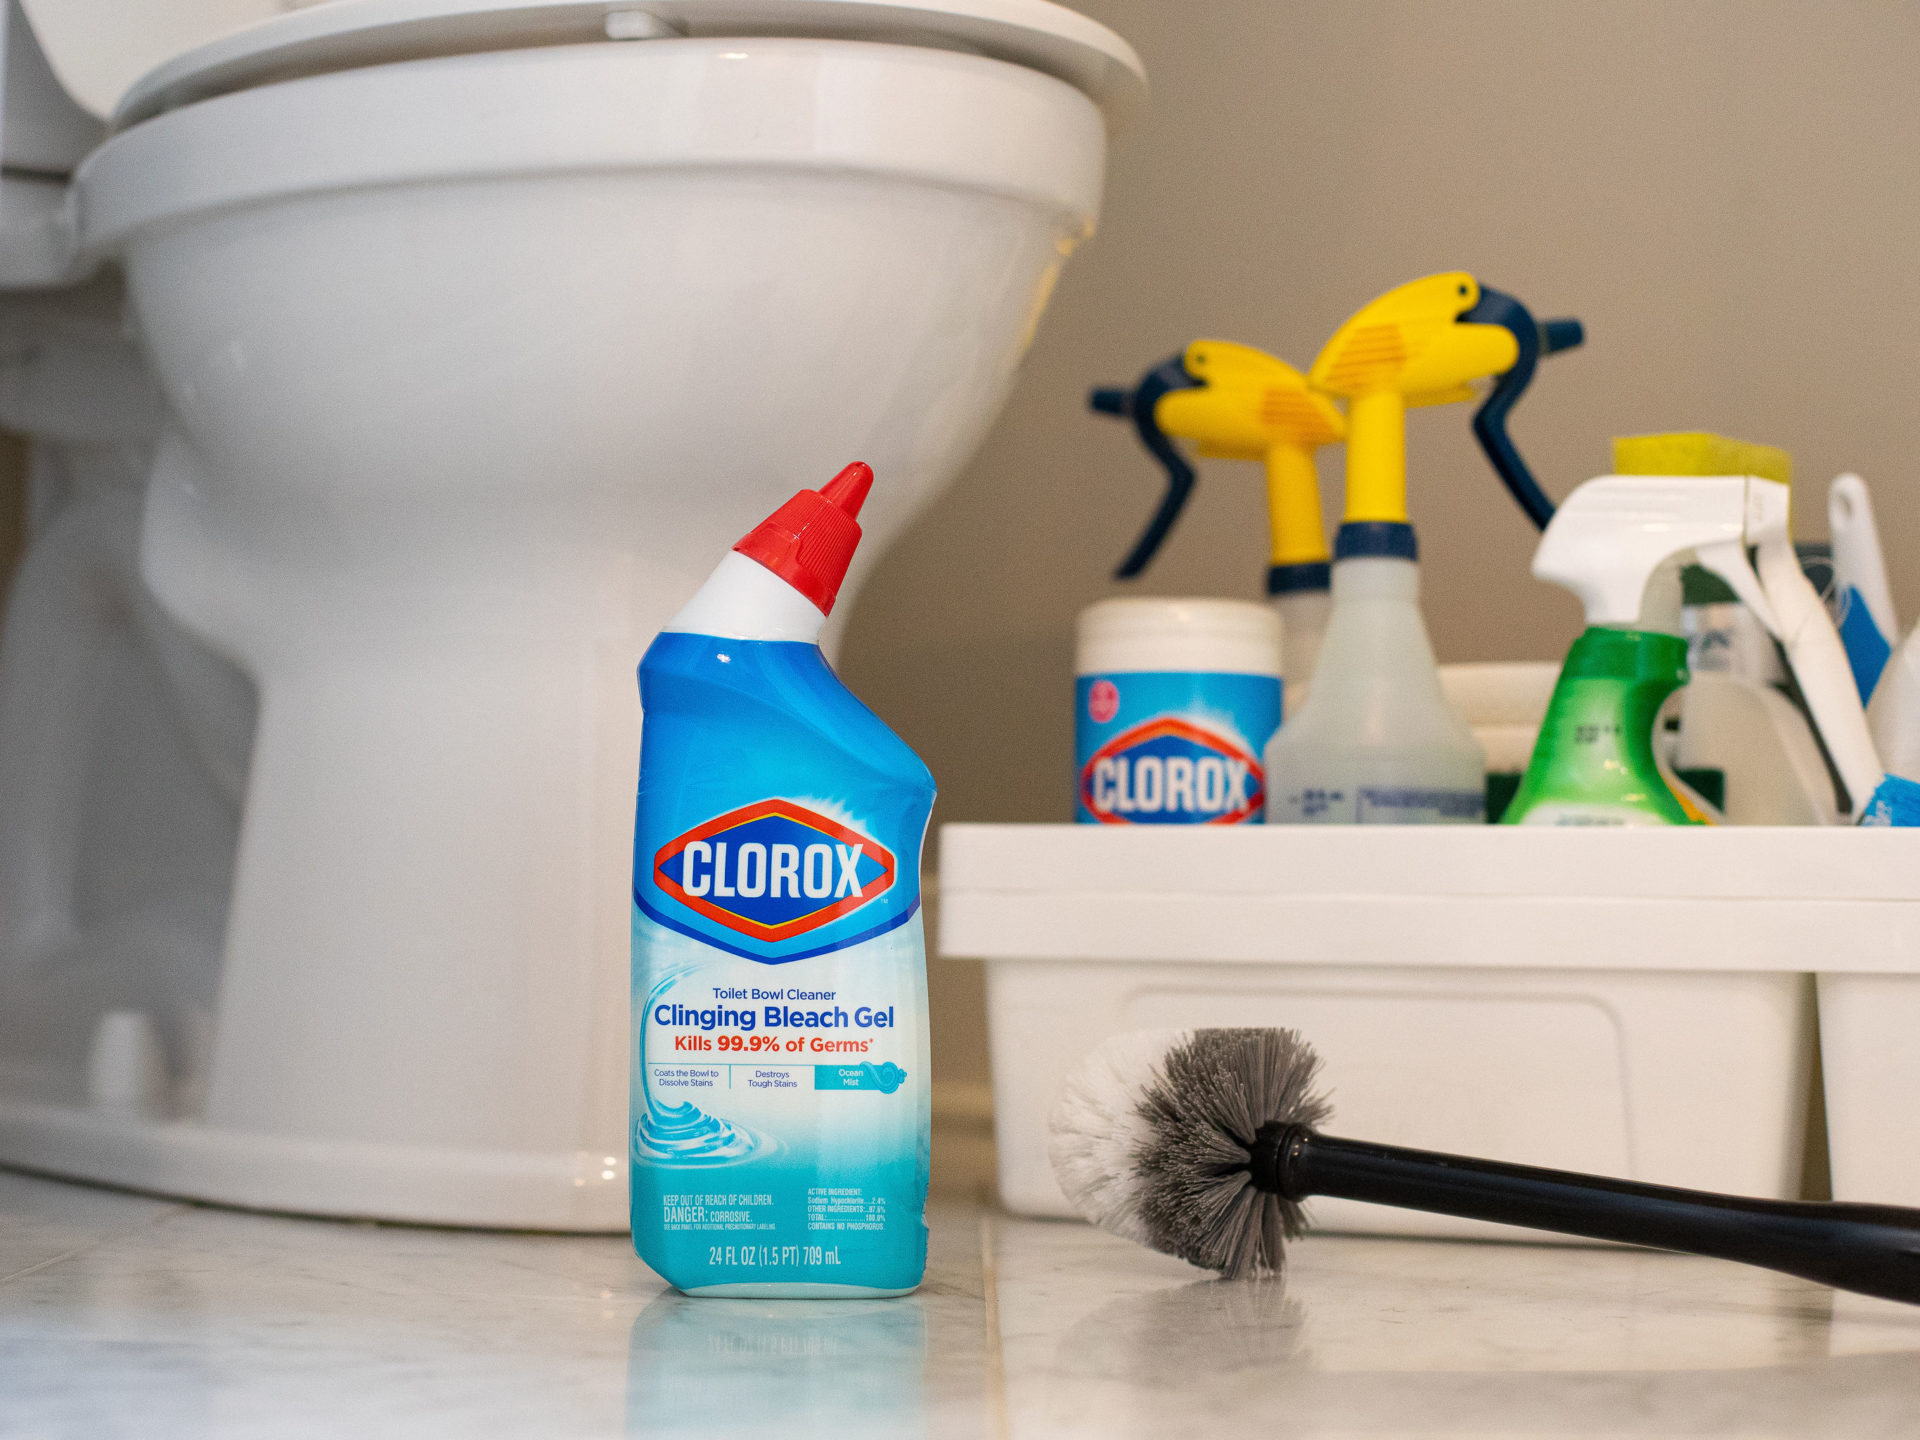 Get Clorox Toilet Bowl Cleaner For Just $1.64 At Kroger